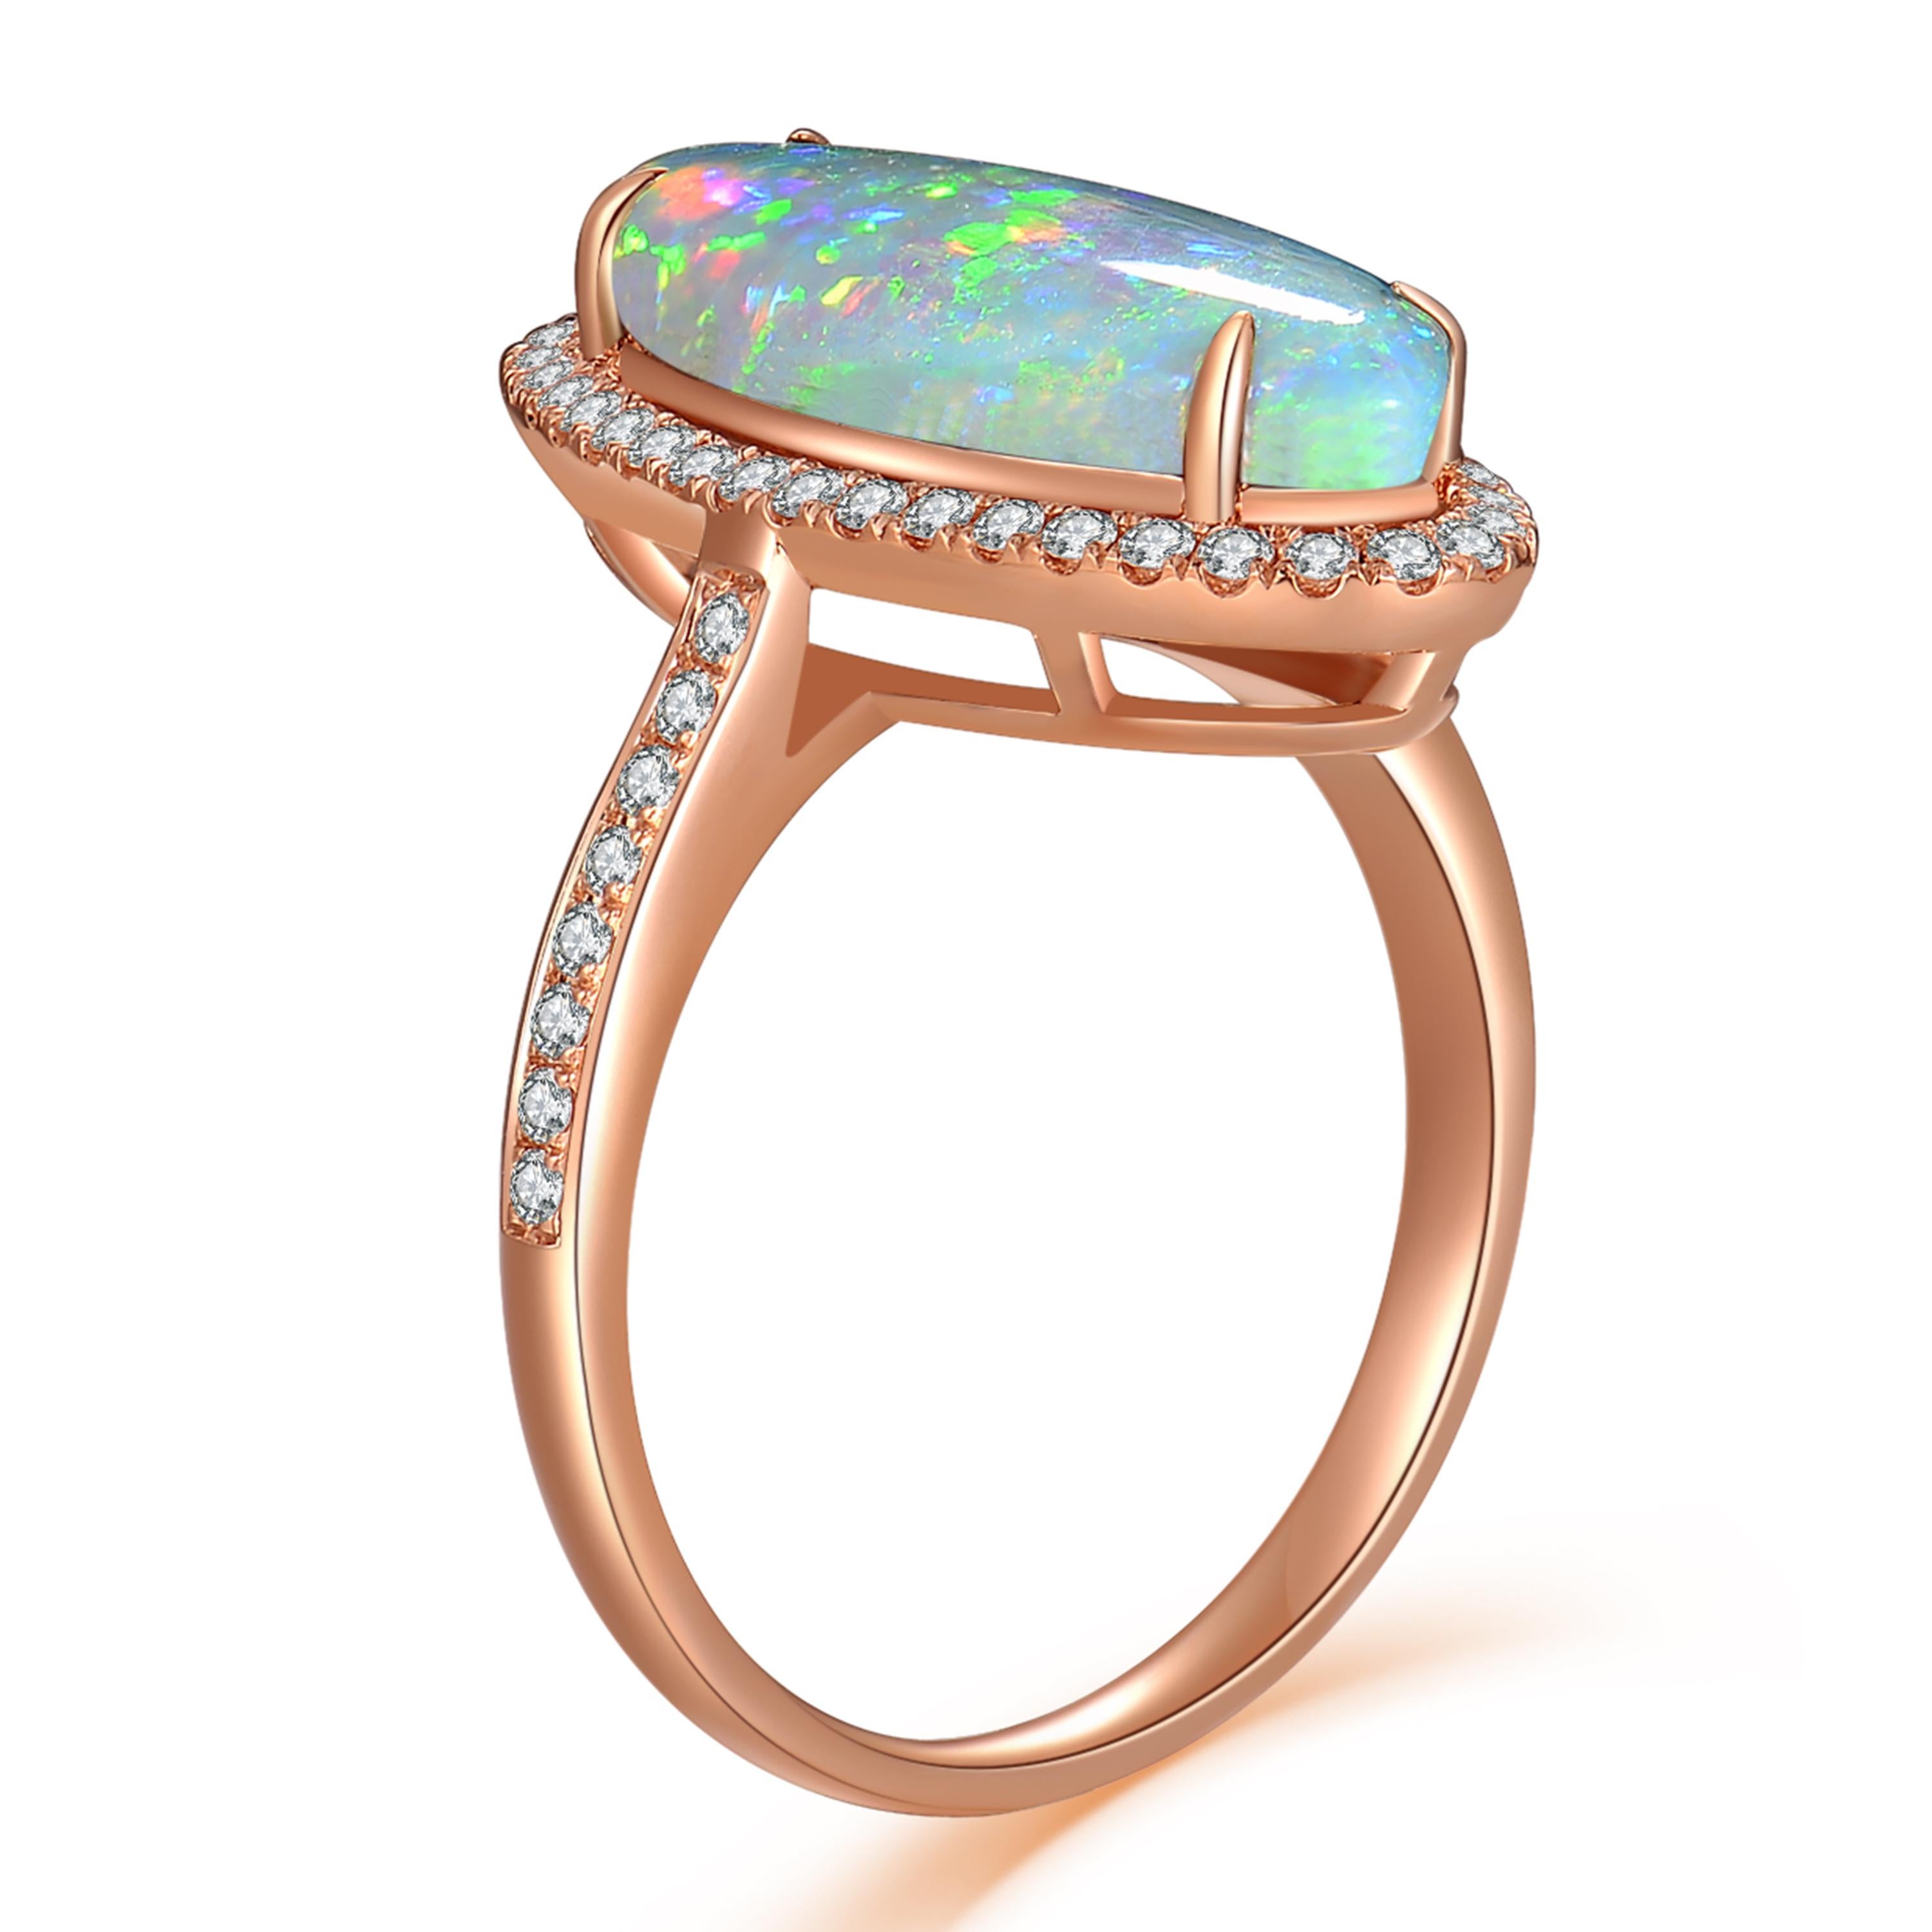 Description:
A one-off opal ring featuring a mesmerising 3.39ct opal bordered with 0.34ct brilliant diamonds, set in 18ct rose gold.

Opal care: Clean opals with lukewarm soapy water.

Specification:
Weight: 4.29gm
Ring size: N (UK) / 63/4